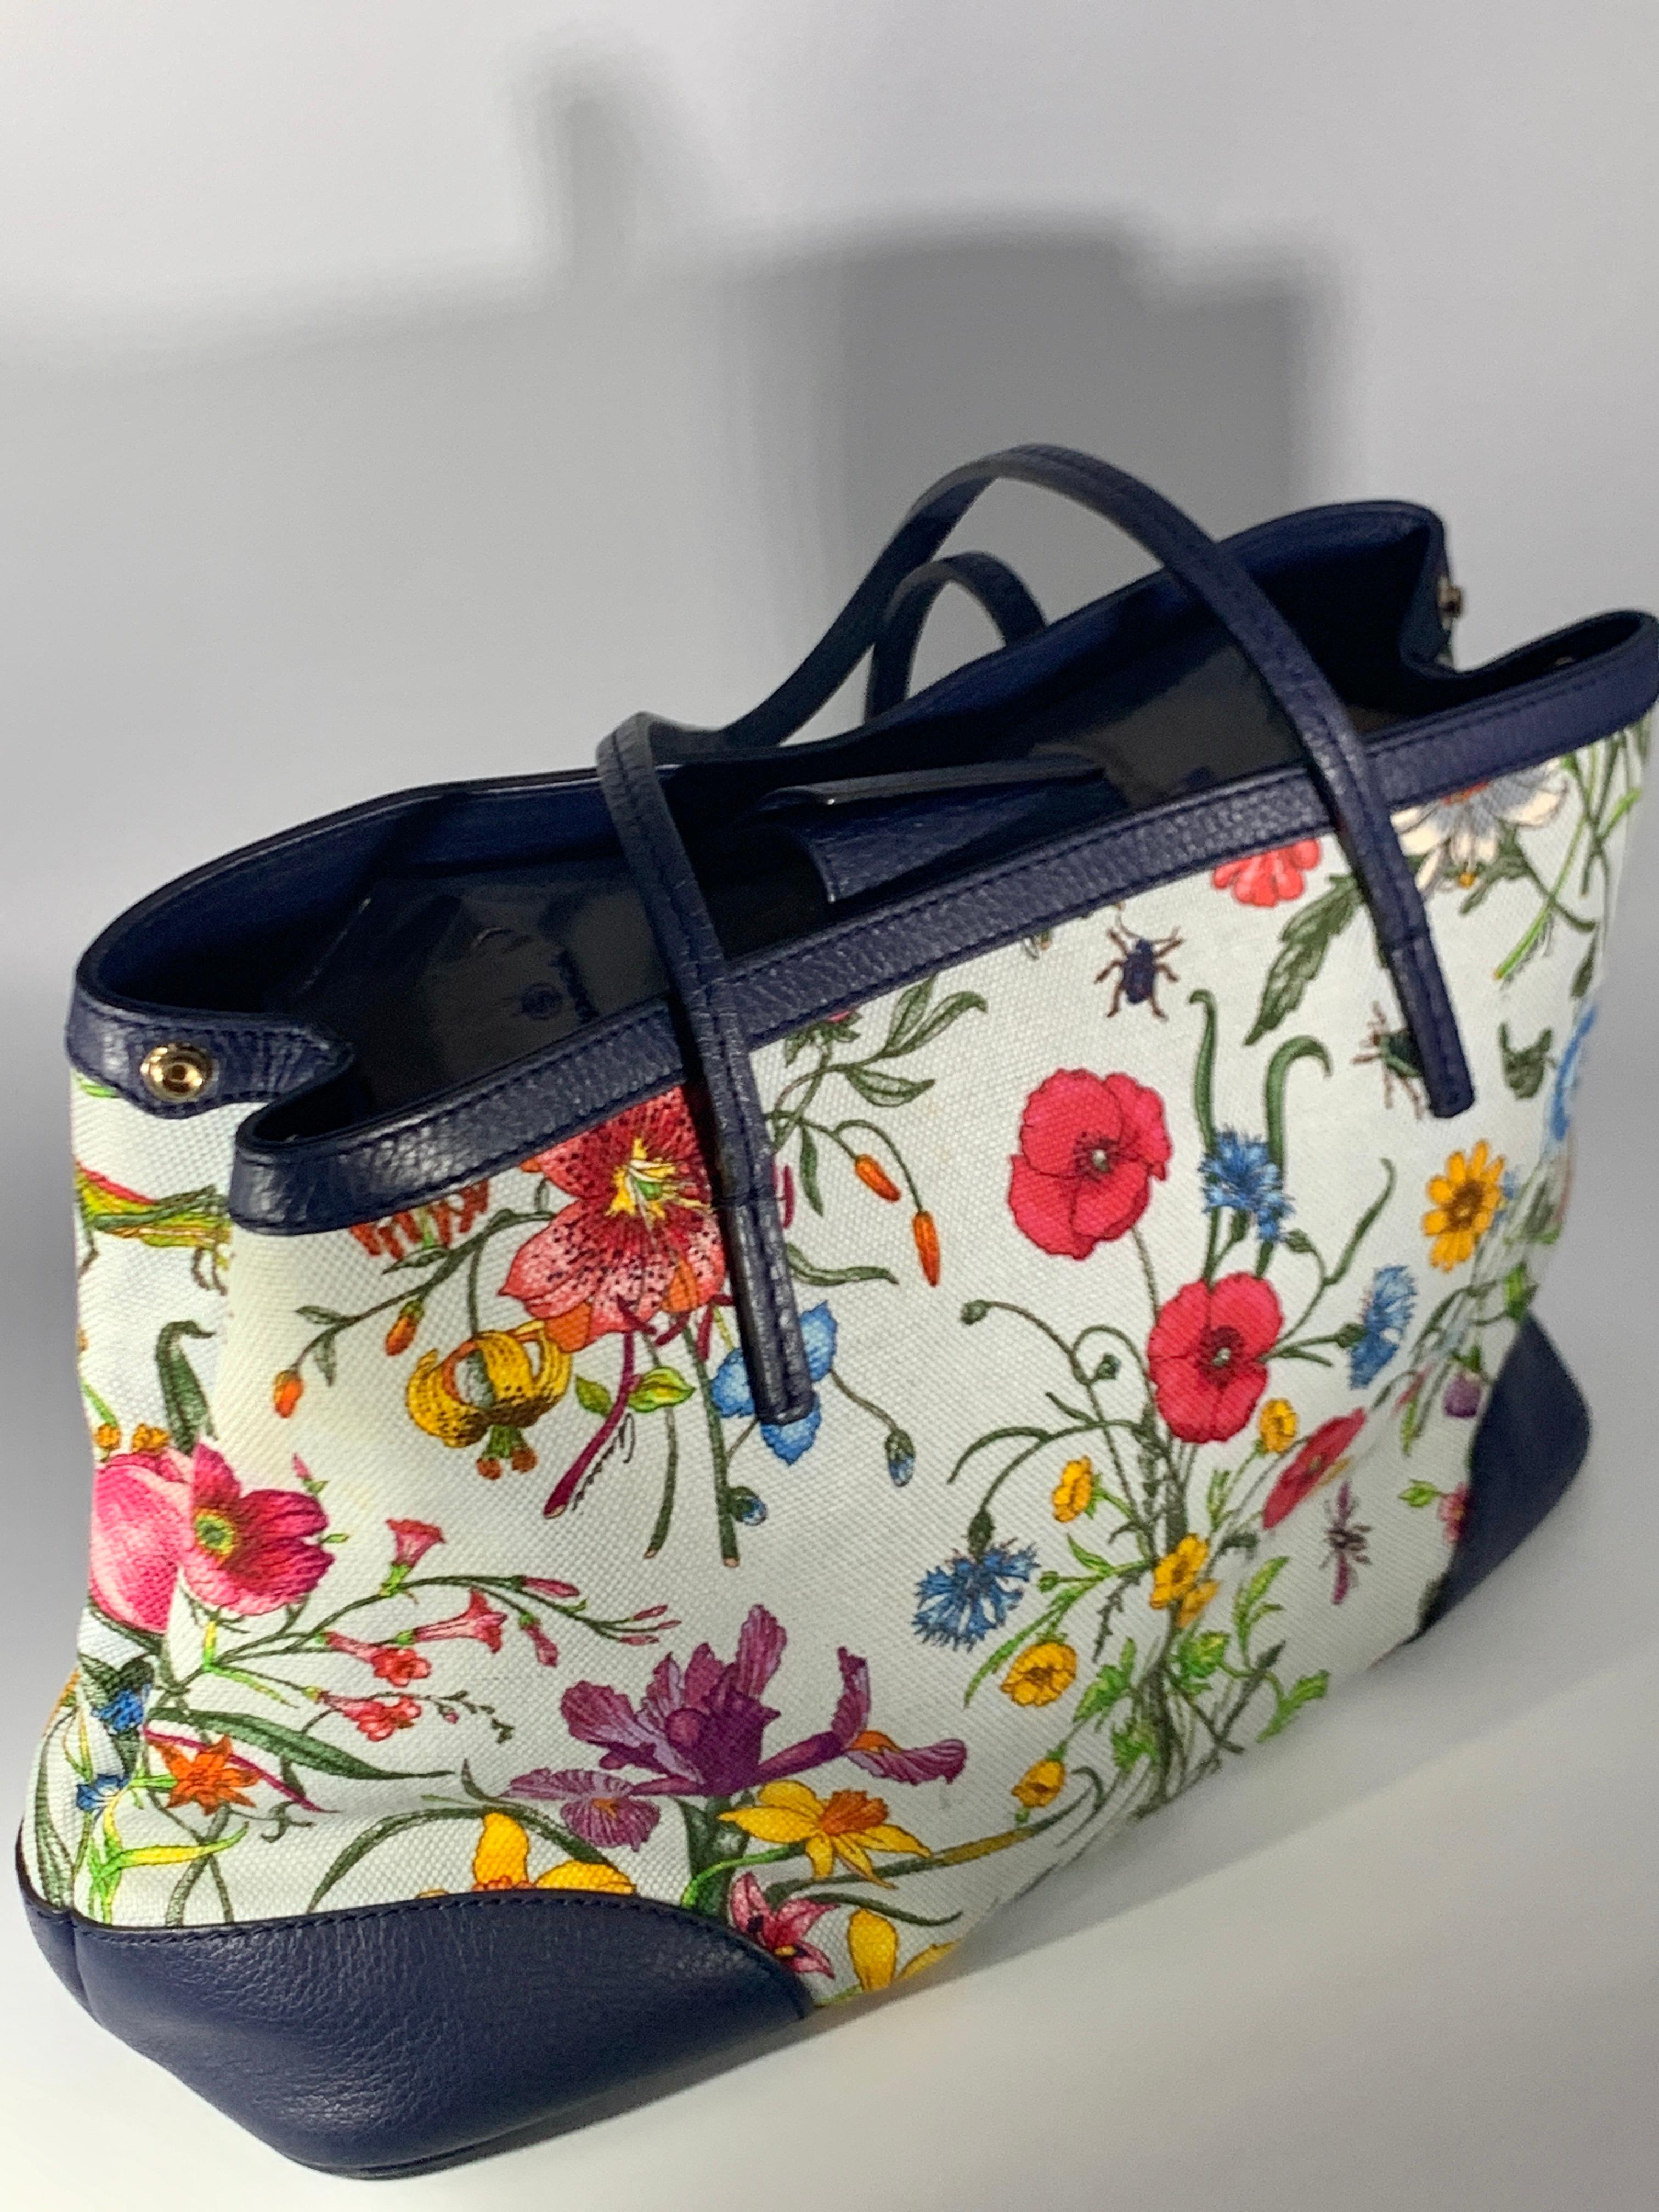  Gucci Flora Canvas Leather Trim Navy Blue With Flowers  Tote Handbag 1705189 4